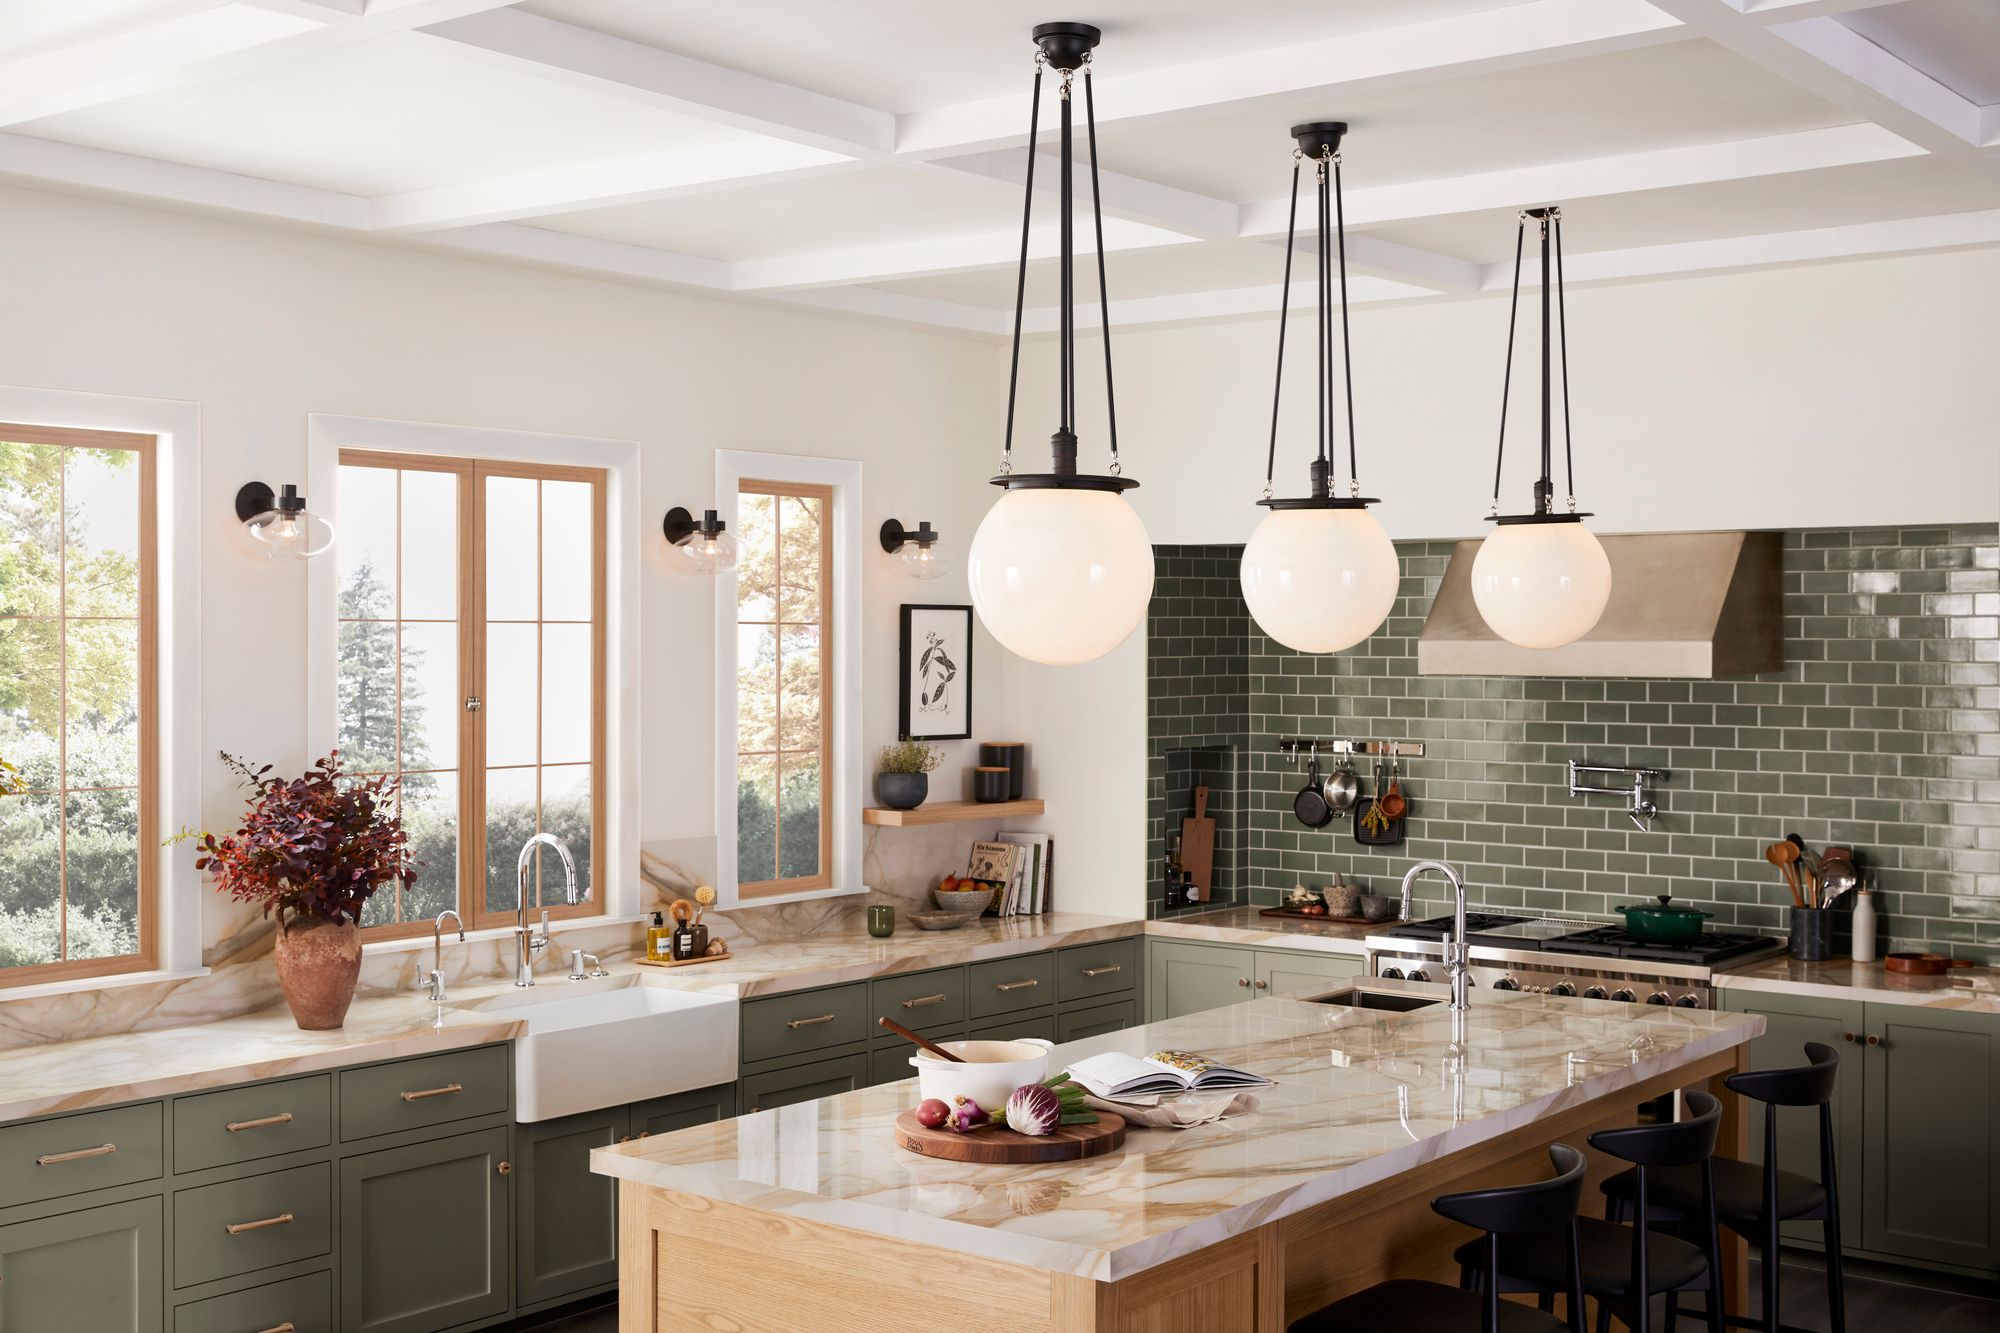 How To Light Your Kitchen Island, Best Pendant Lights For Kitchen Island 2021